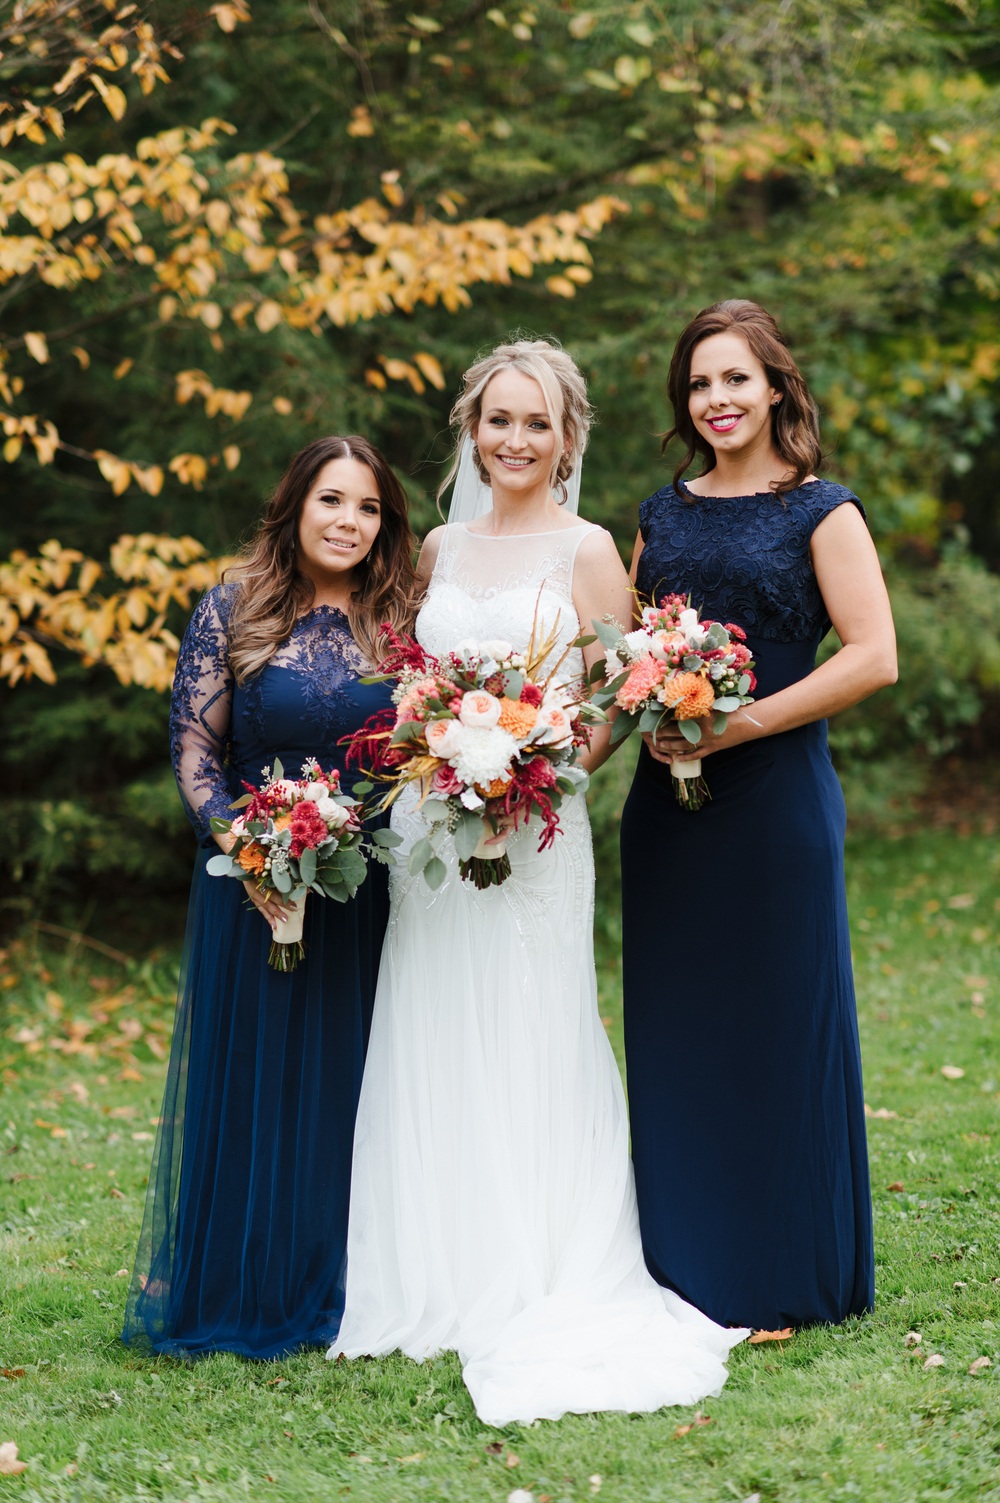 The Rustic Chic Fall Wedding of our Pinterest Dreams ⋆ Ruffled